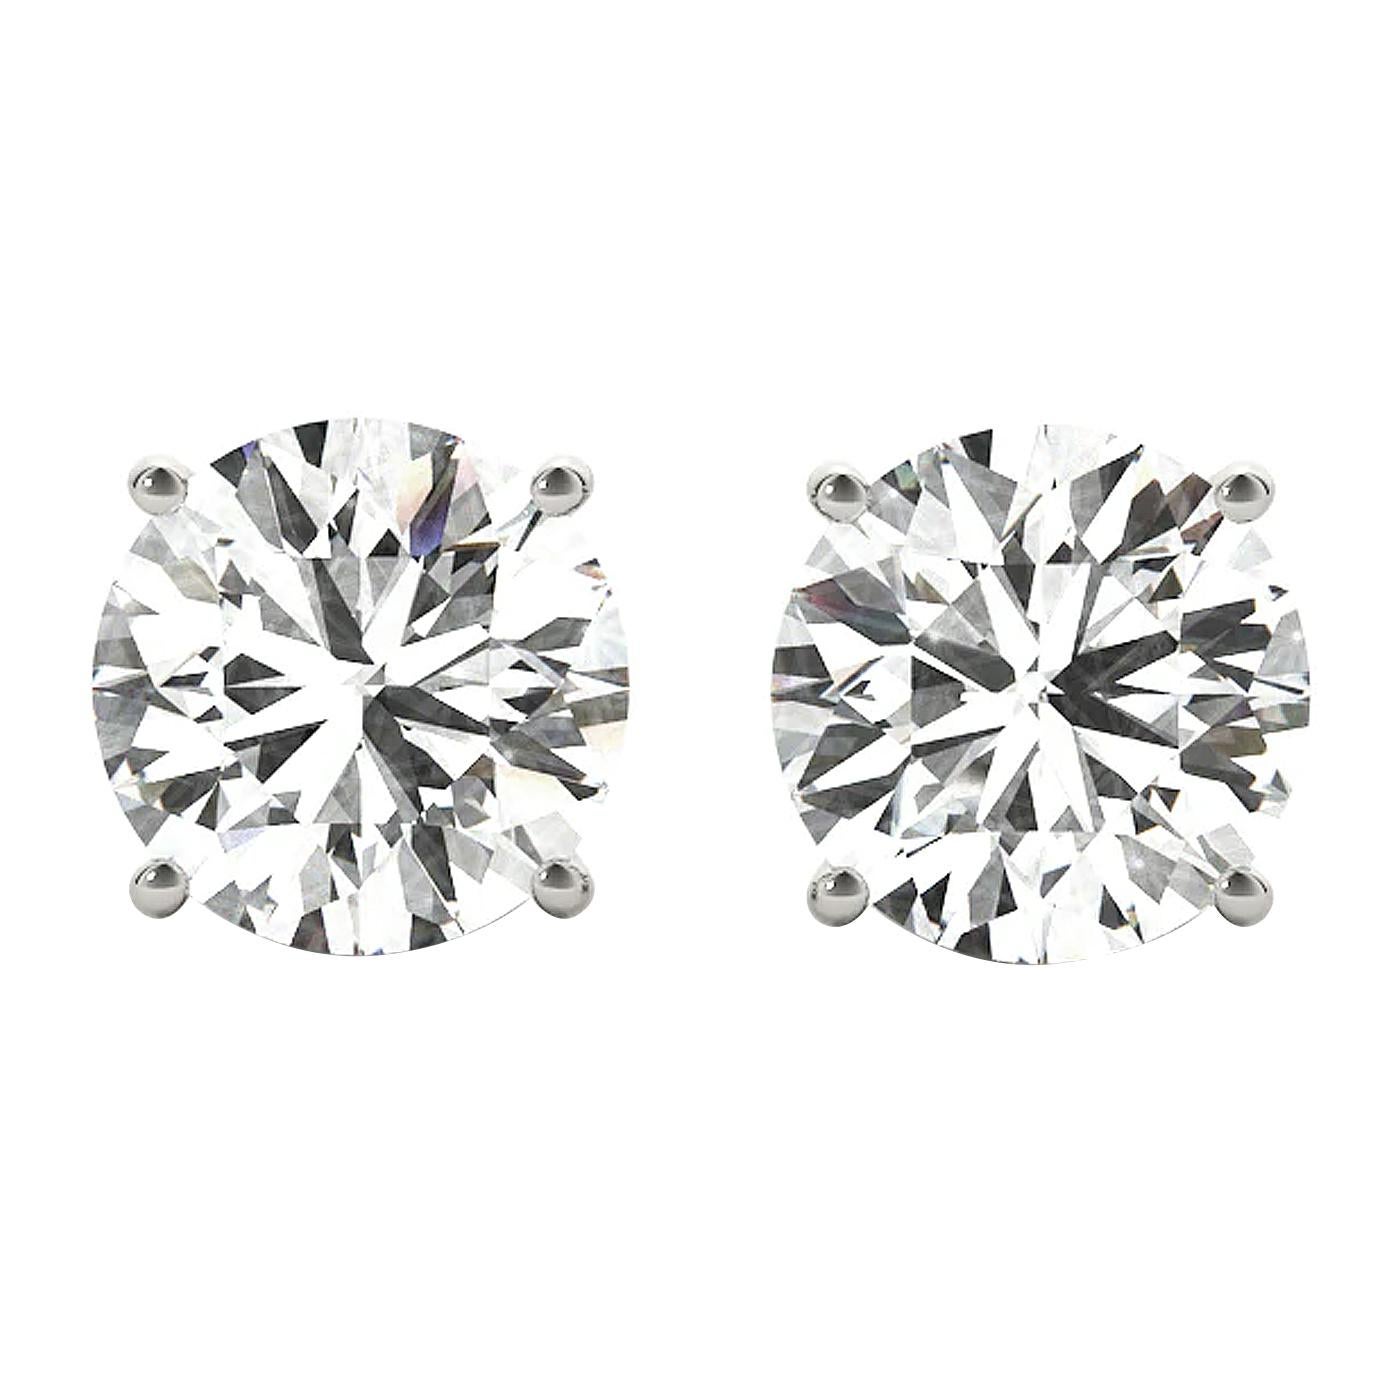 Captivate her with the stunning and dazzling look of these 4 prong basket-setting natural diamond earrings. Beautifully crafted in Platinum, these gorgeous diamond earrings feature 1.70ct (0.85 Carat each) round cut diamonds on each Earring, with G